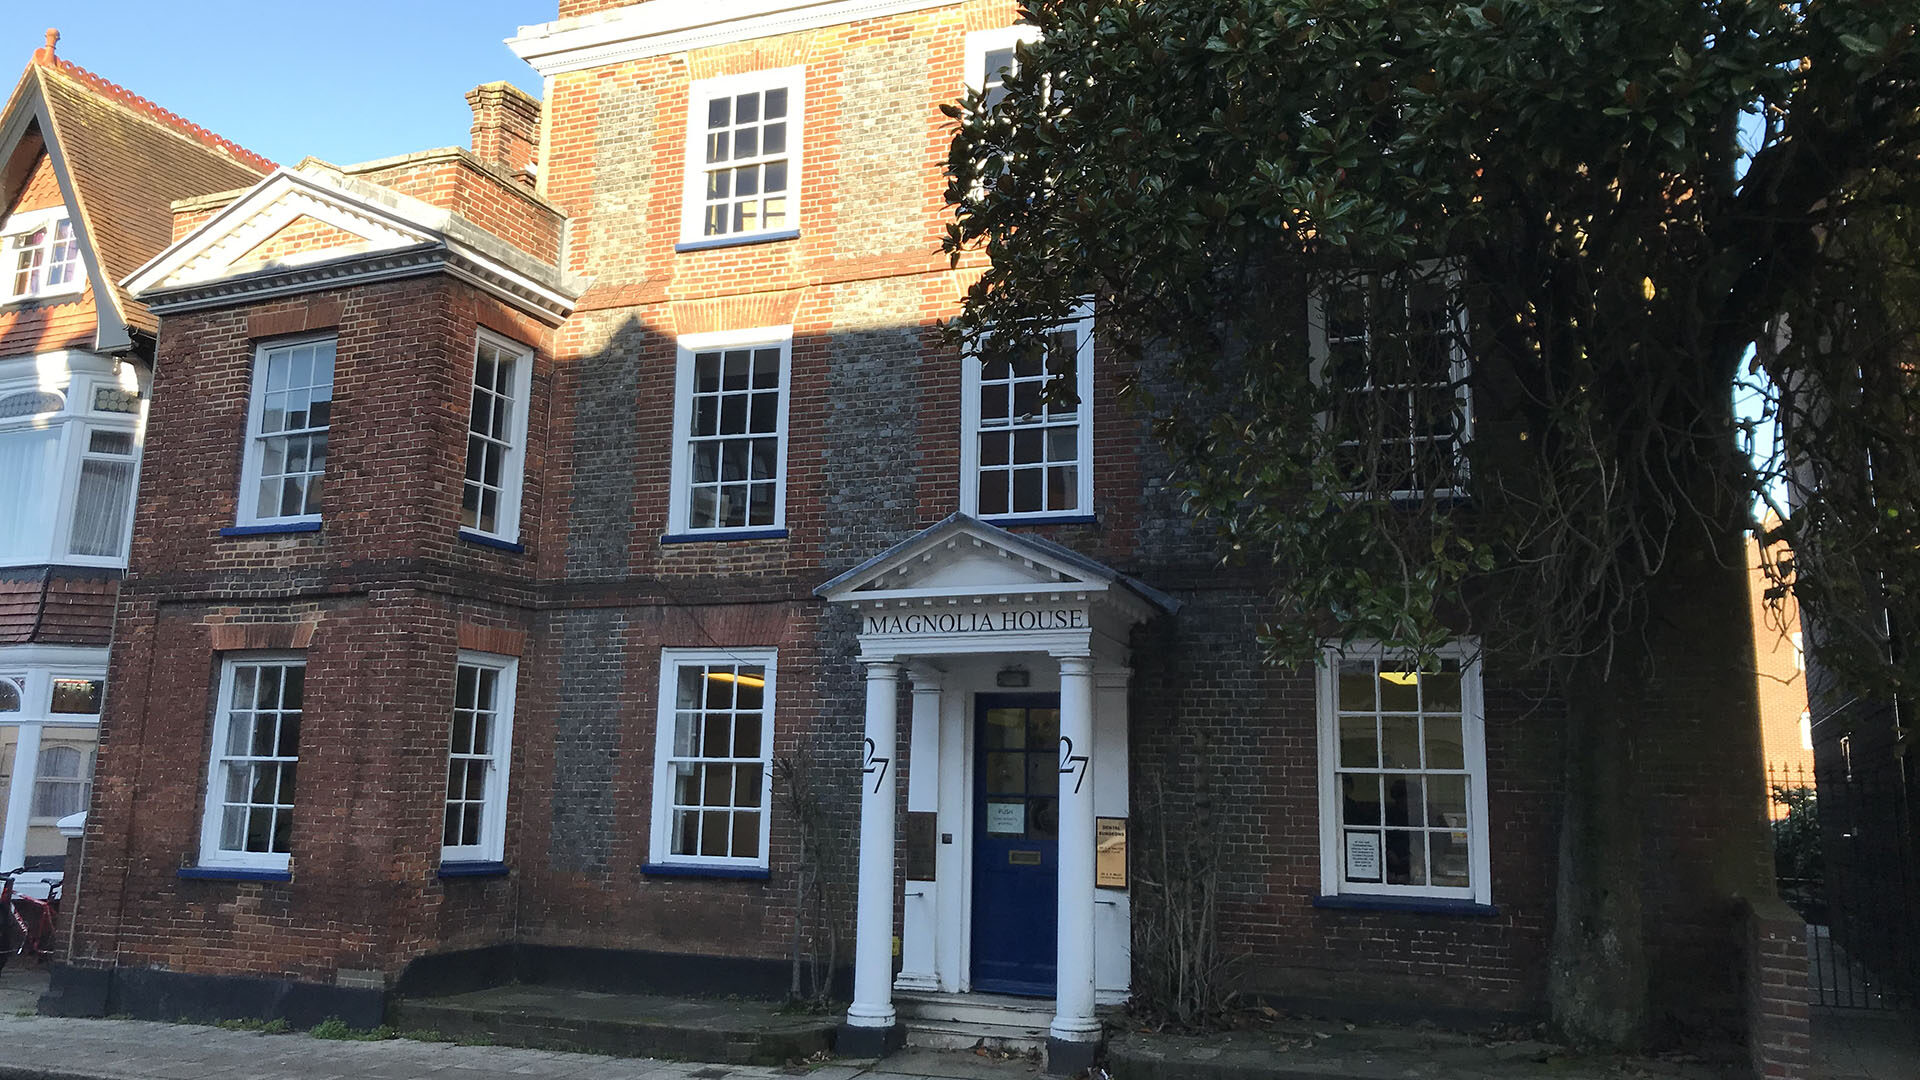 Planning and listed building consent for grade II listed town house